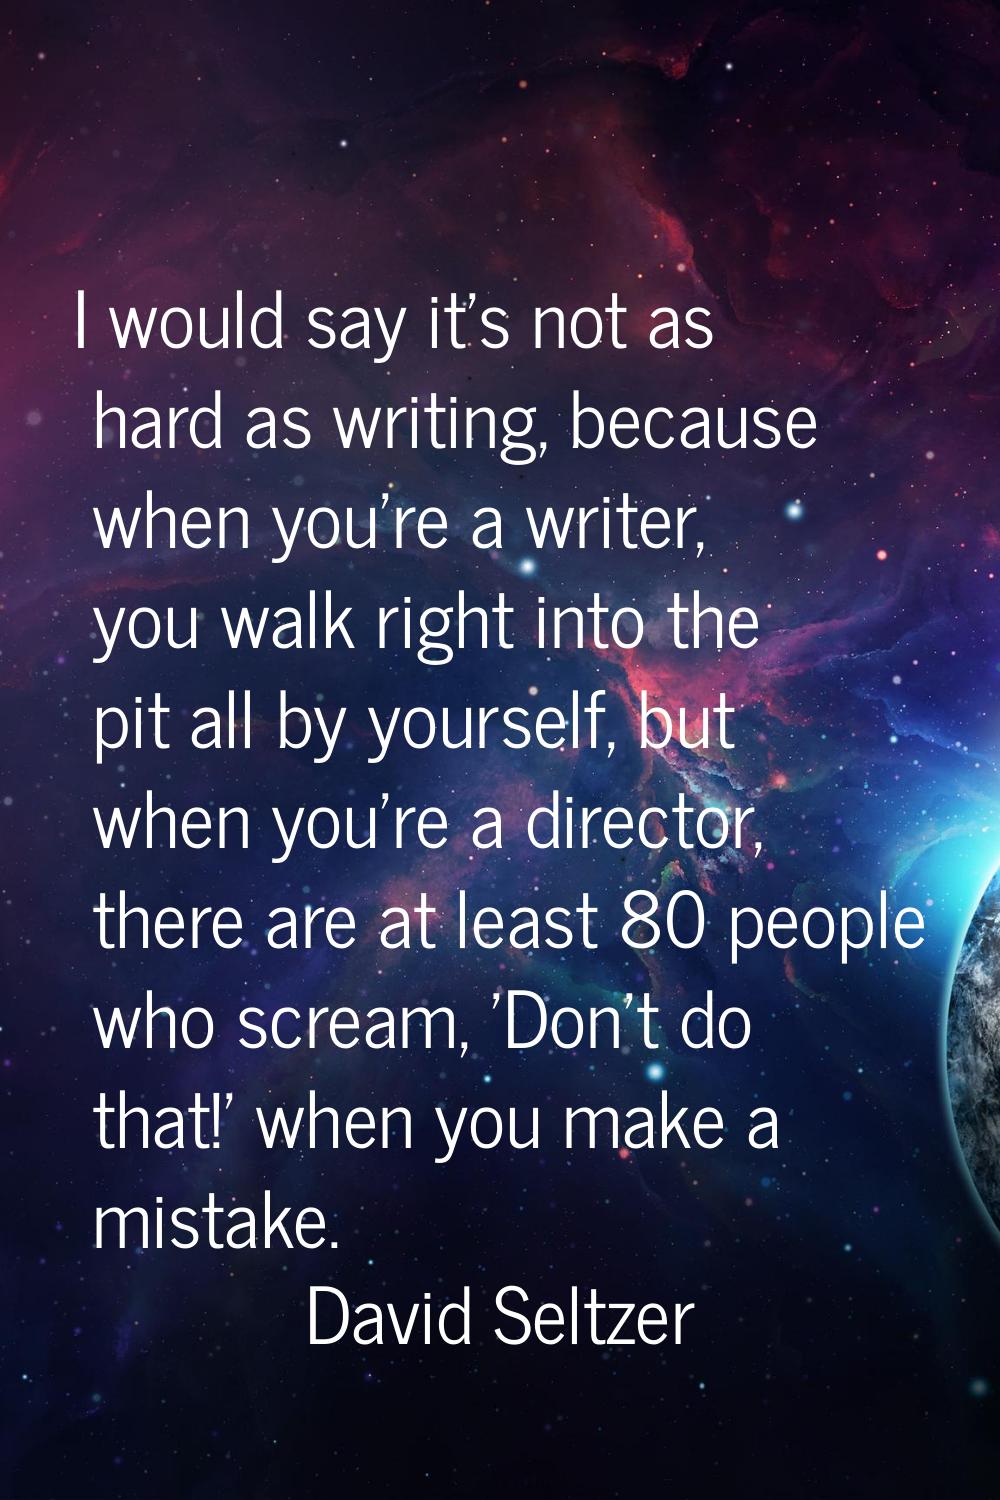 I would say it's not as hard as writing, because when you're a writer, you walk right into the pit 